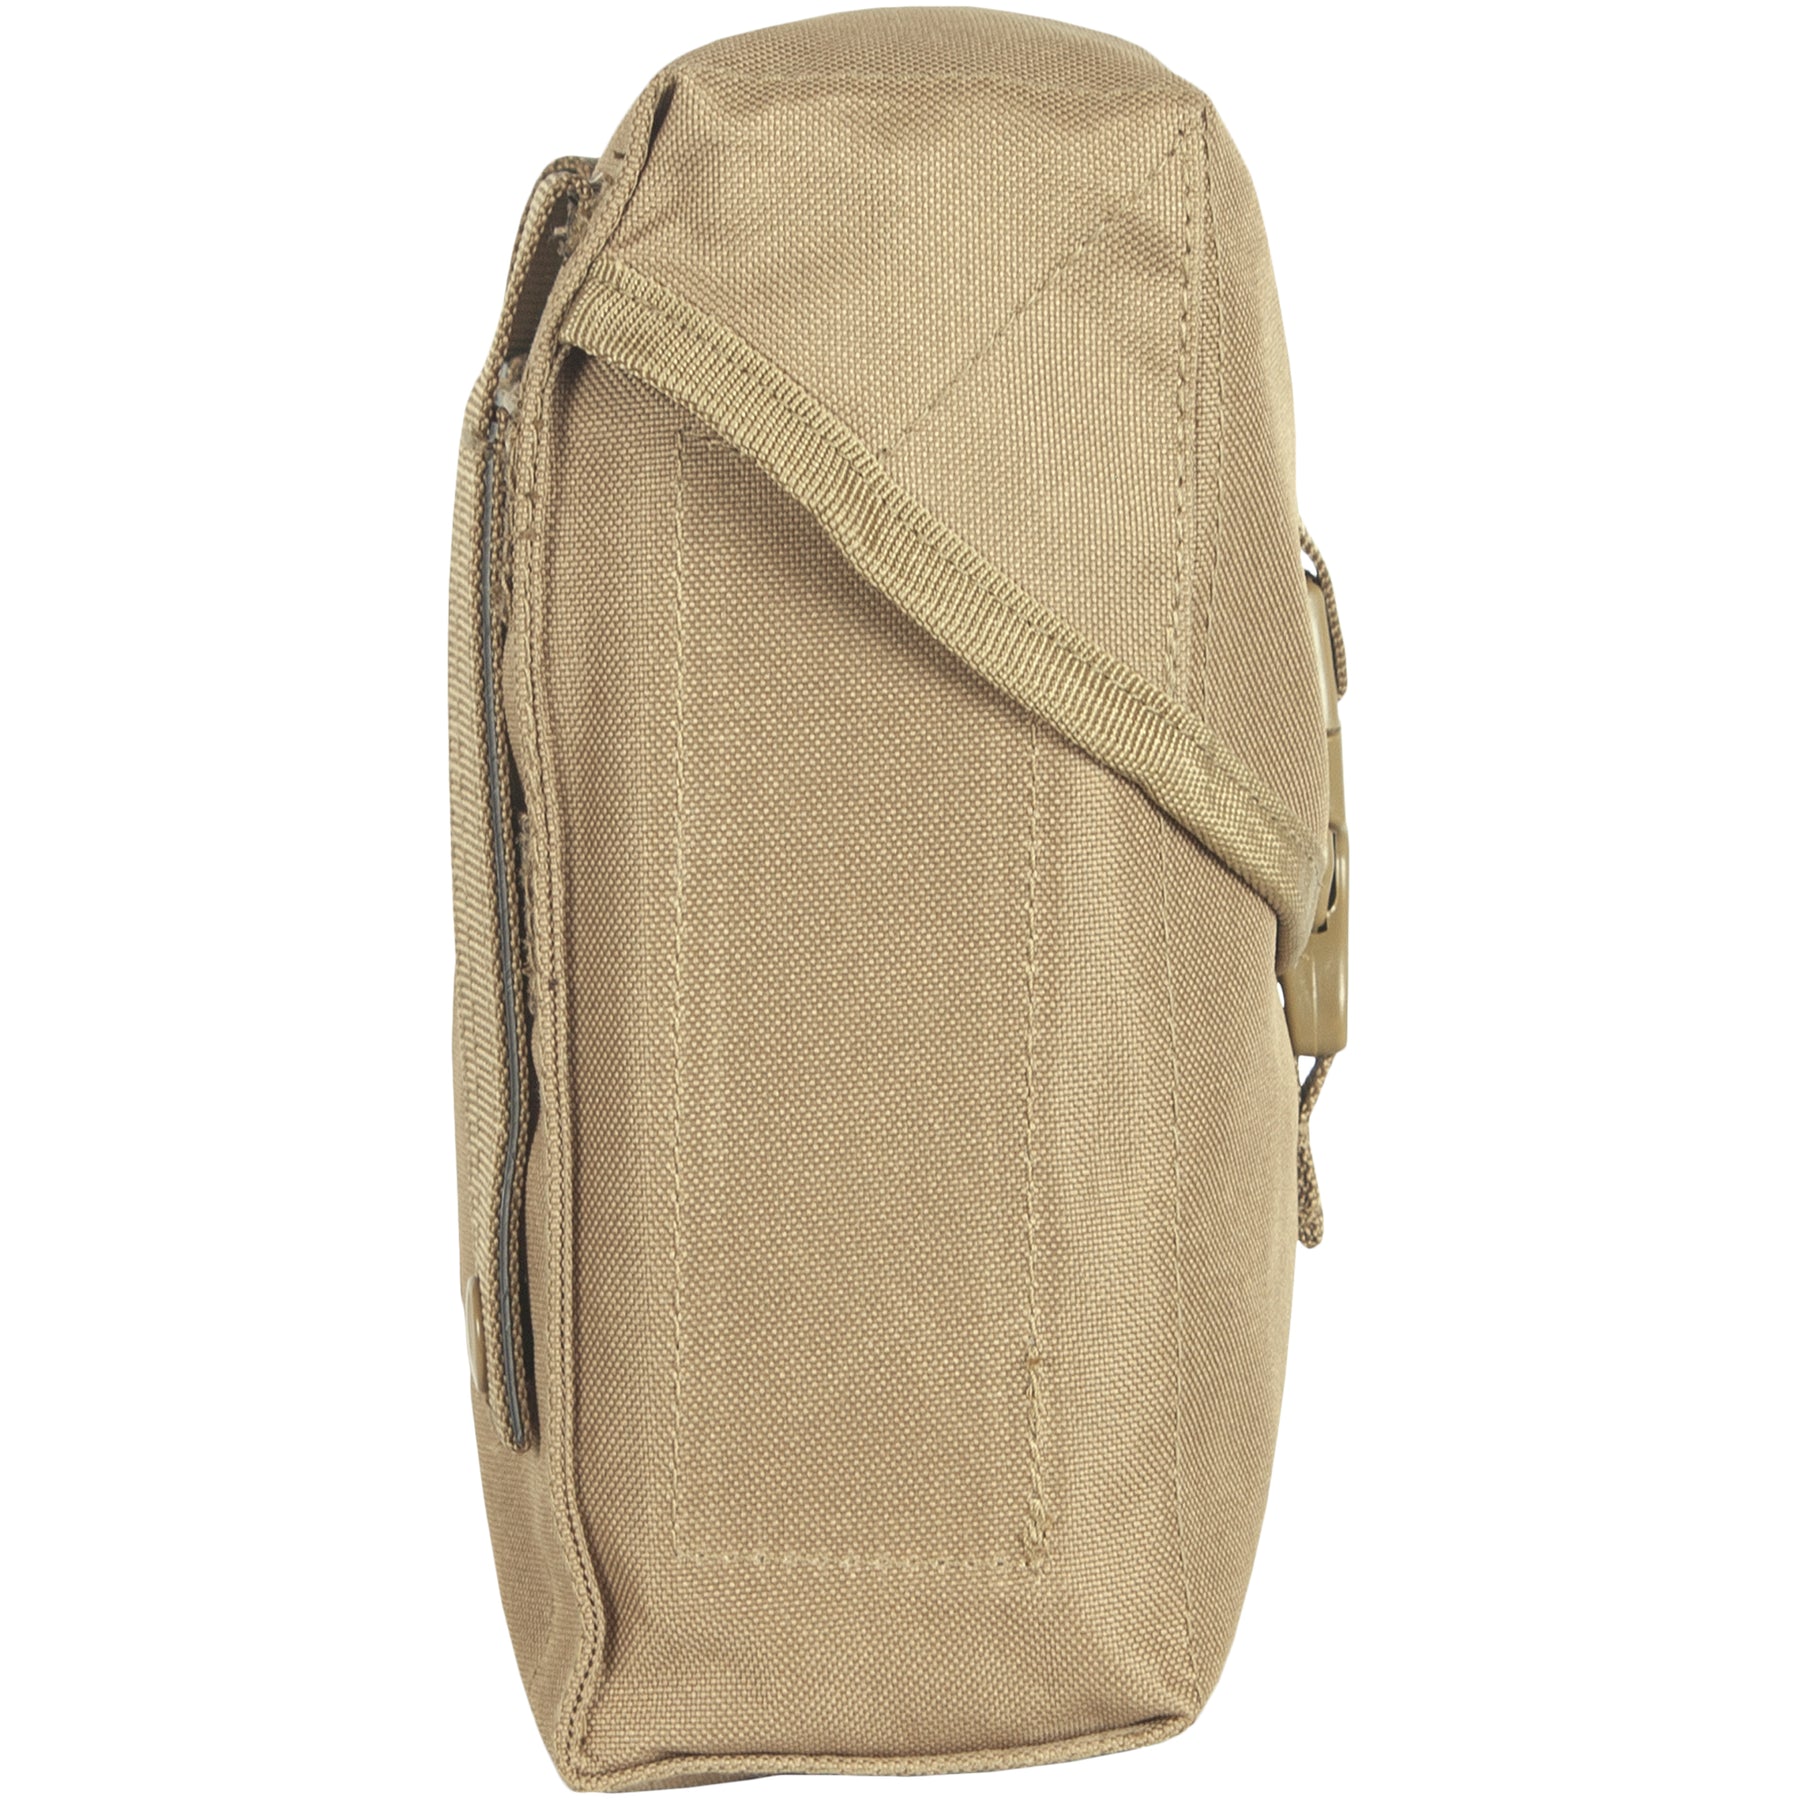 Side of S.A.W. Pouch. 